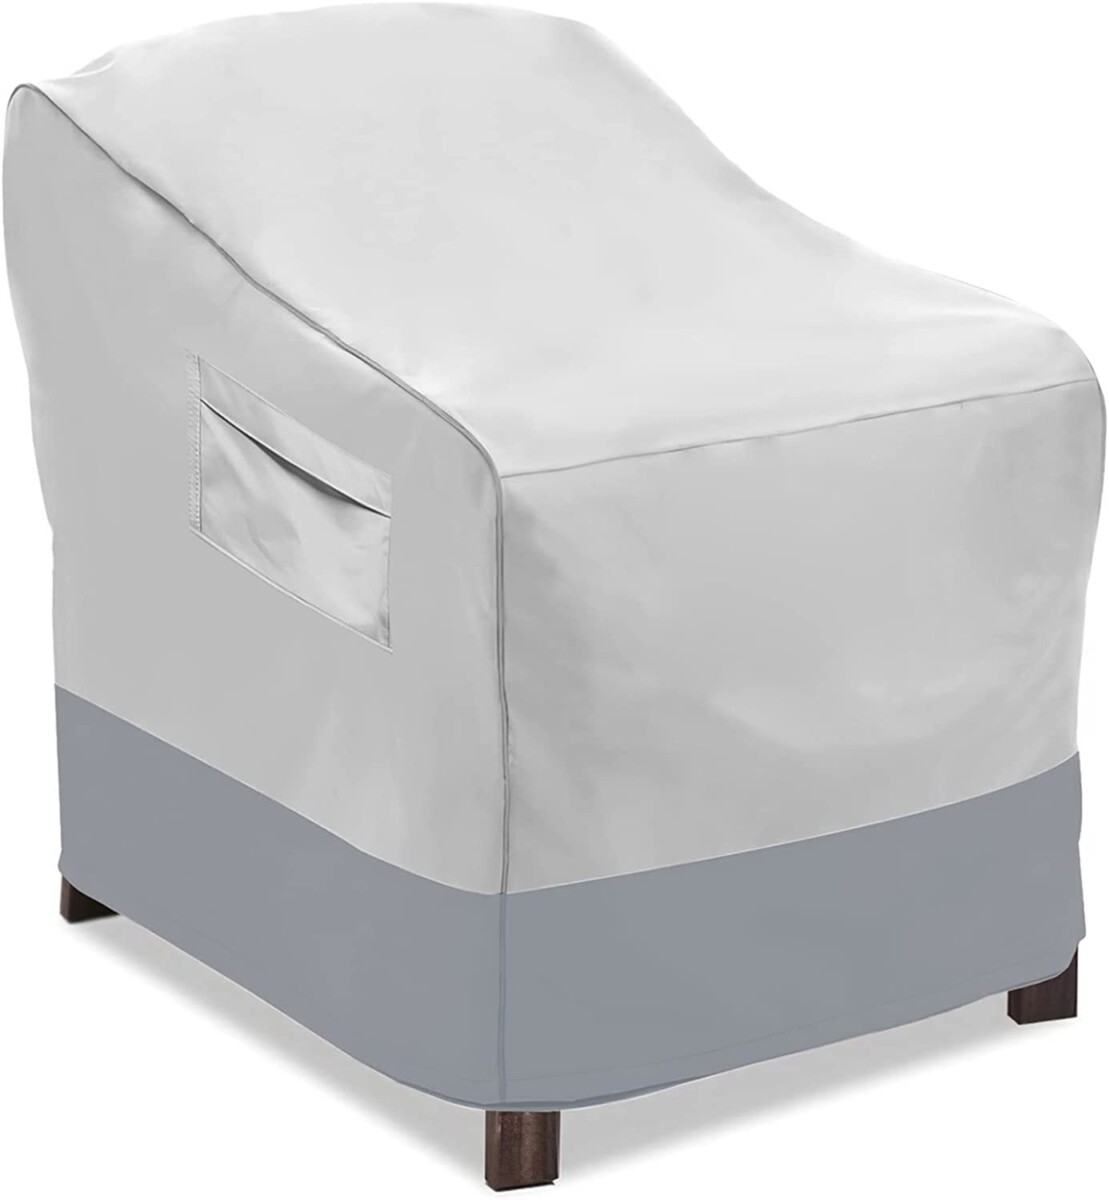 Alea's Deals Coverify Patio Chair Cover 2 Pack-40%OFF  